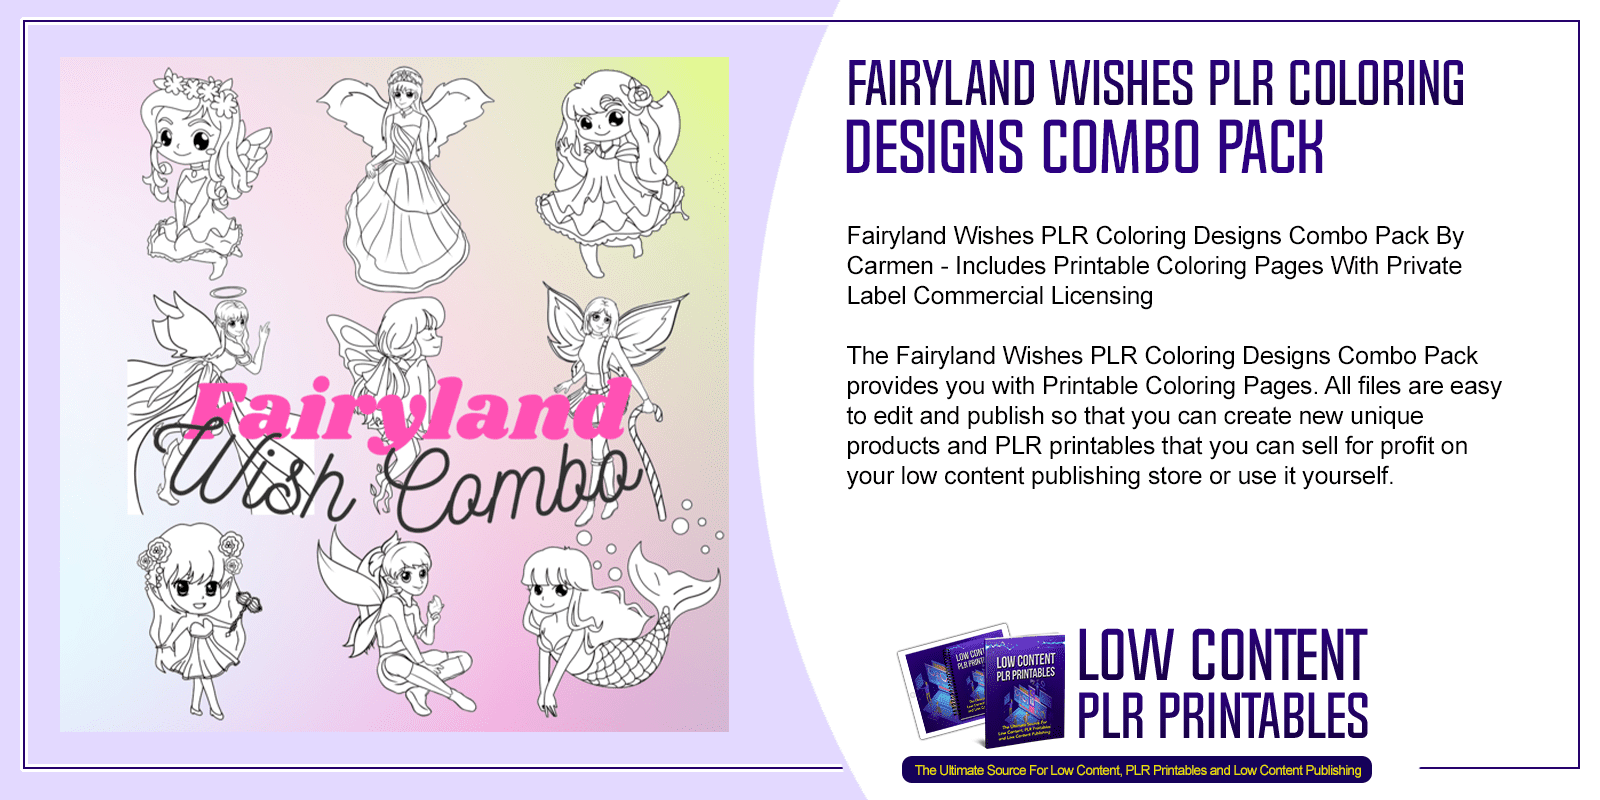 Fairyland Wishes PLR Coloring Designs Combo Pack